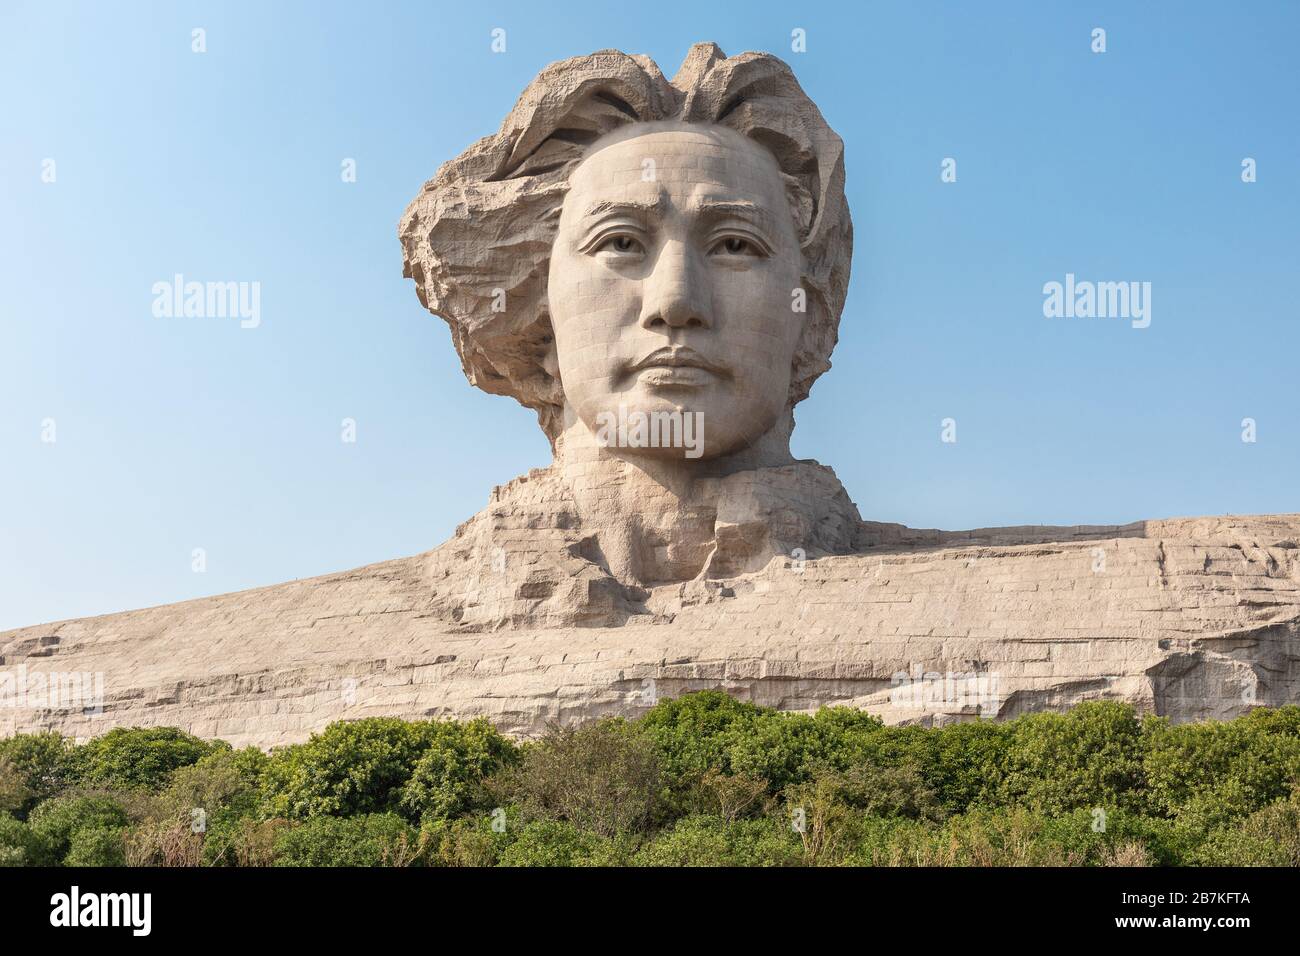 --FILE--Sculpture of Chairman Mao Zedong in his youth is seen at Orange Isle, a isle and also a tourist attraction in Xiang River, Changsha city, cent Stock Photo